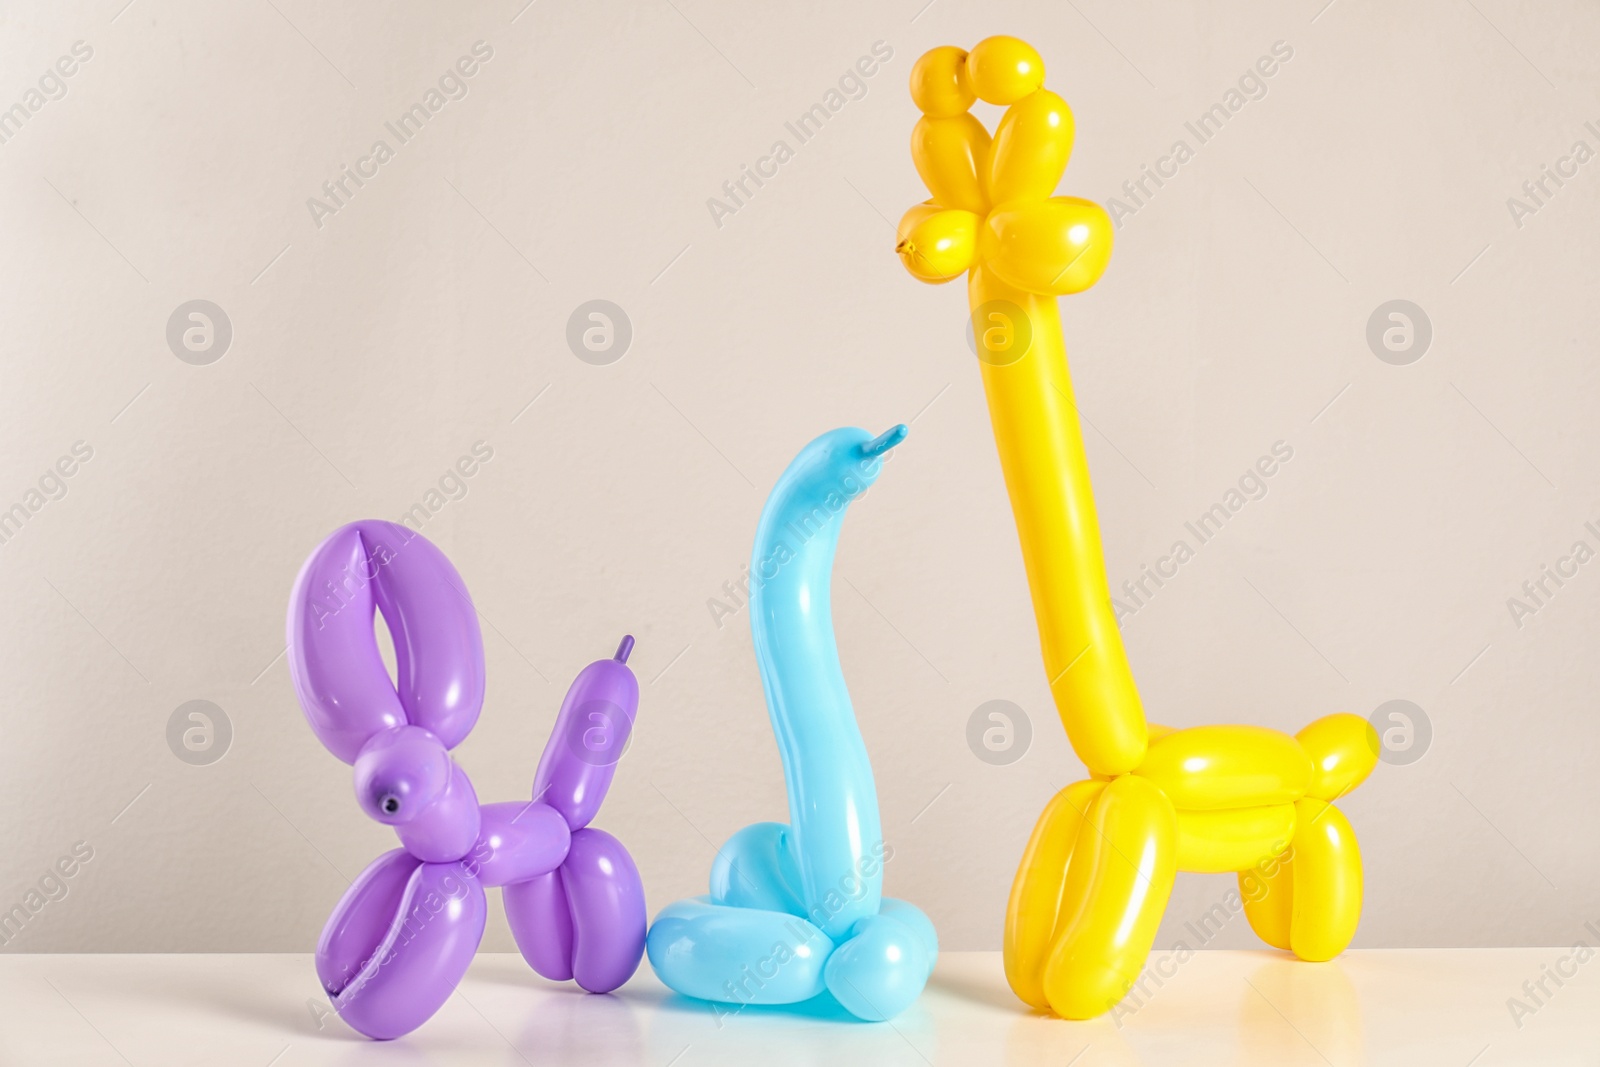 Photo of Animal figures made of modelling balloons on table against color background